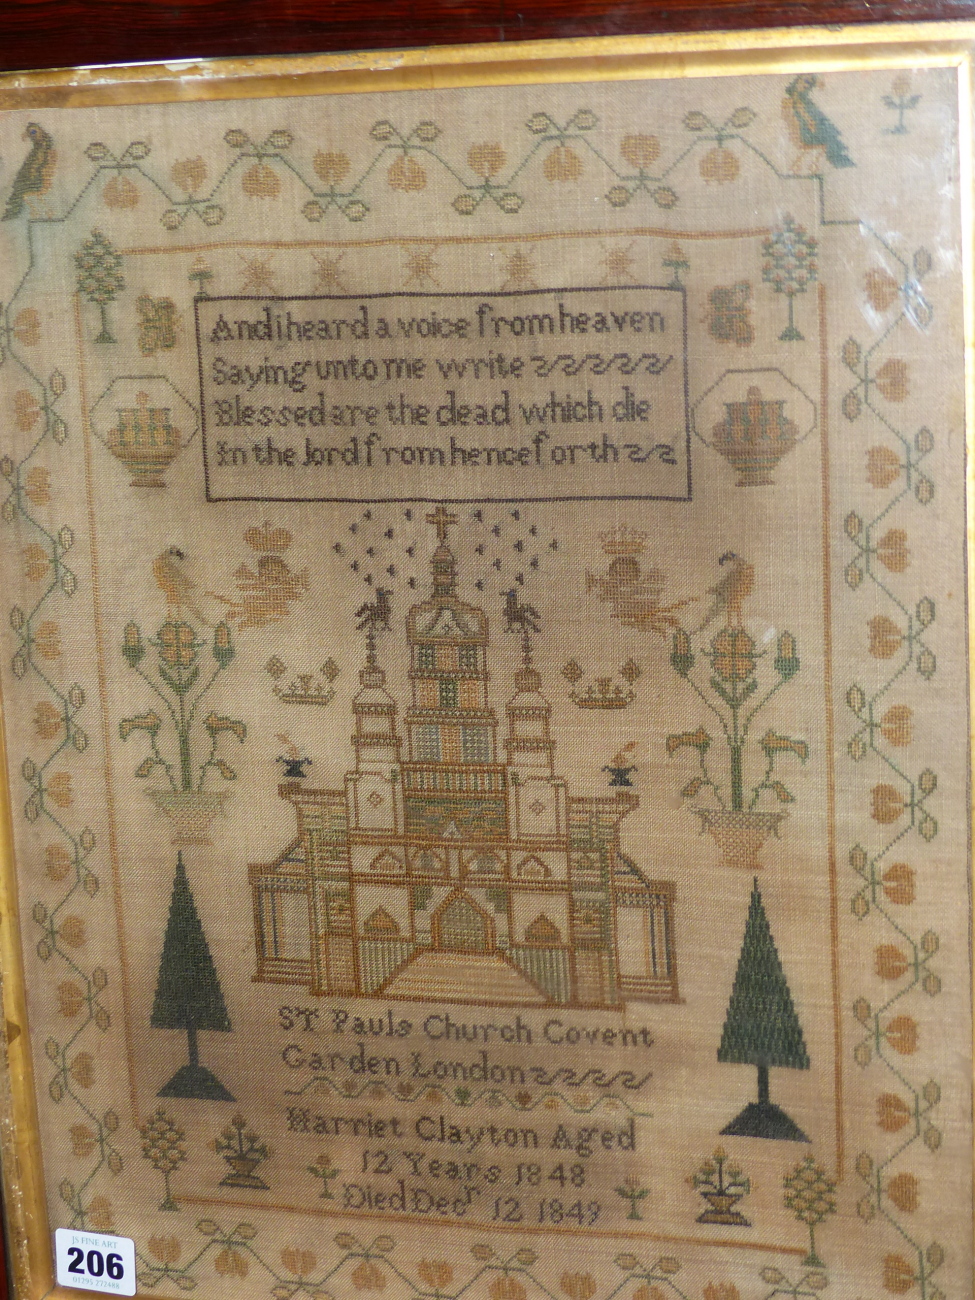 A VICTORIAN NEEDLEPOINT SAMPLER WITH A SCENE OF ST.PAUL'S CHURCH, COVENT GARDEN BELOW VERSE WITH